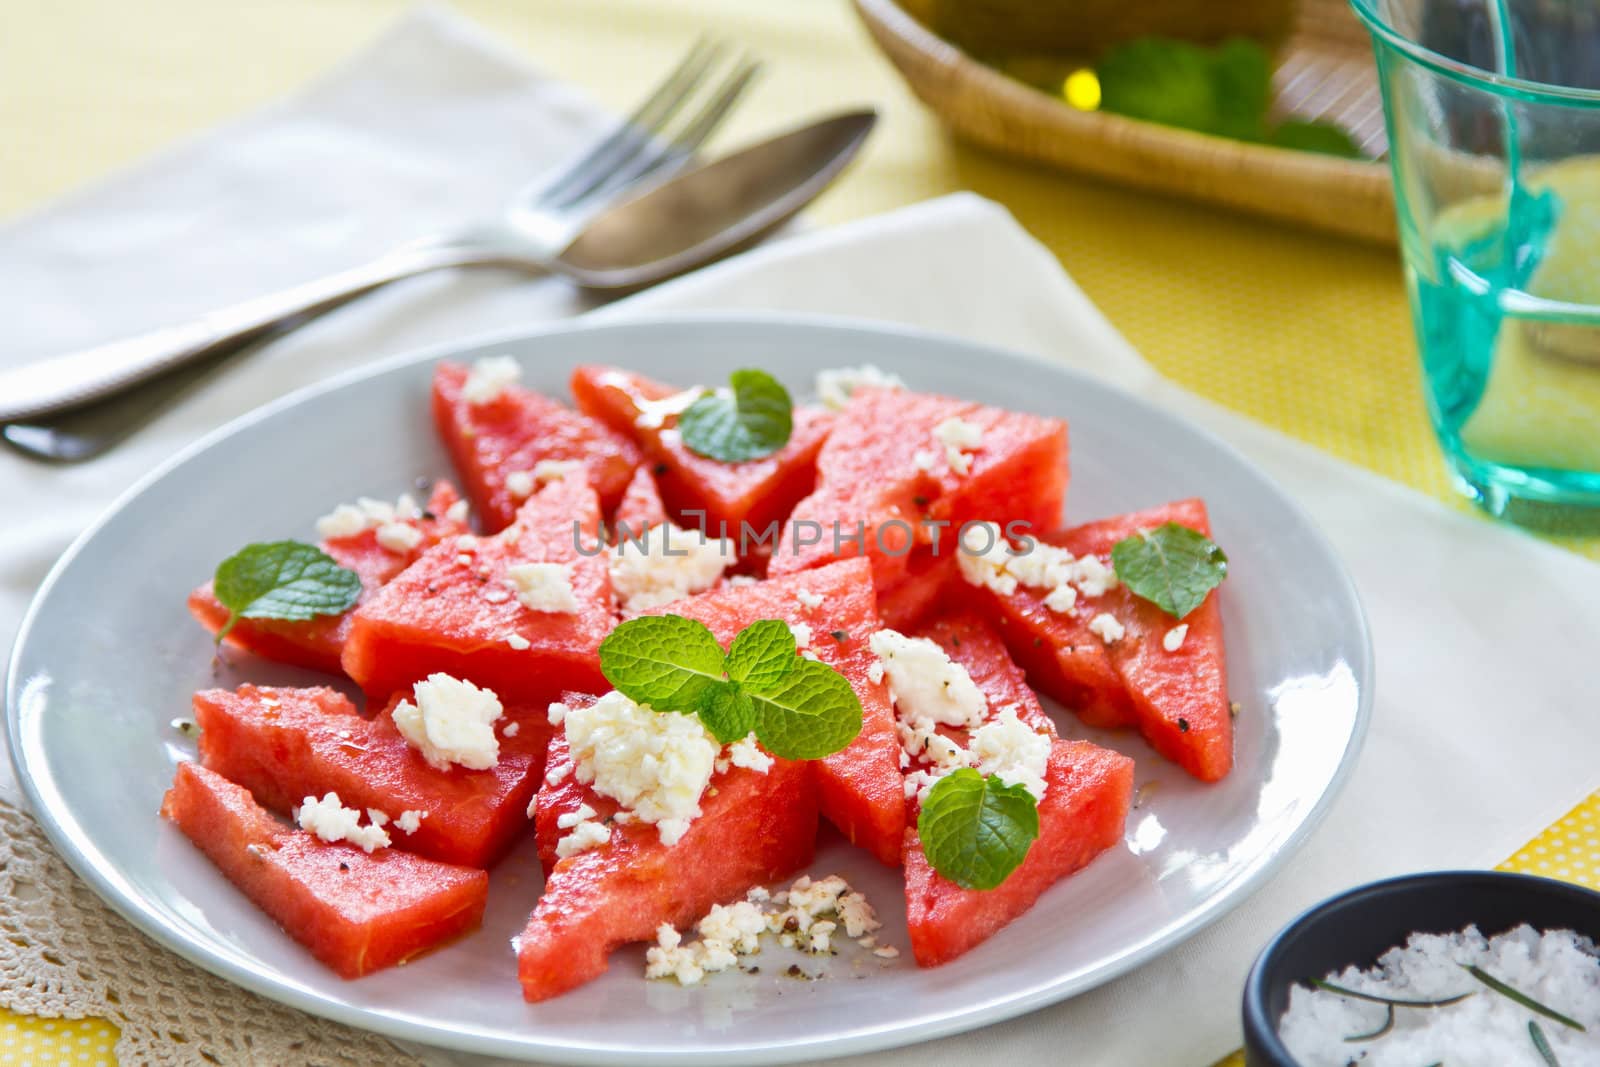 Watermelon with Feta cheese and mint salad